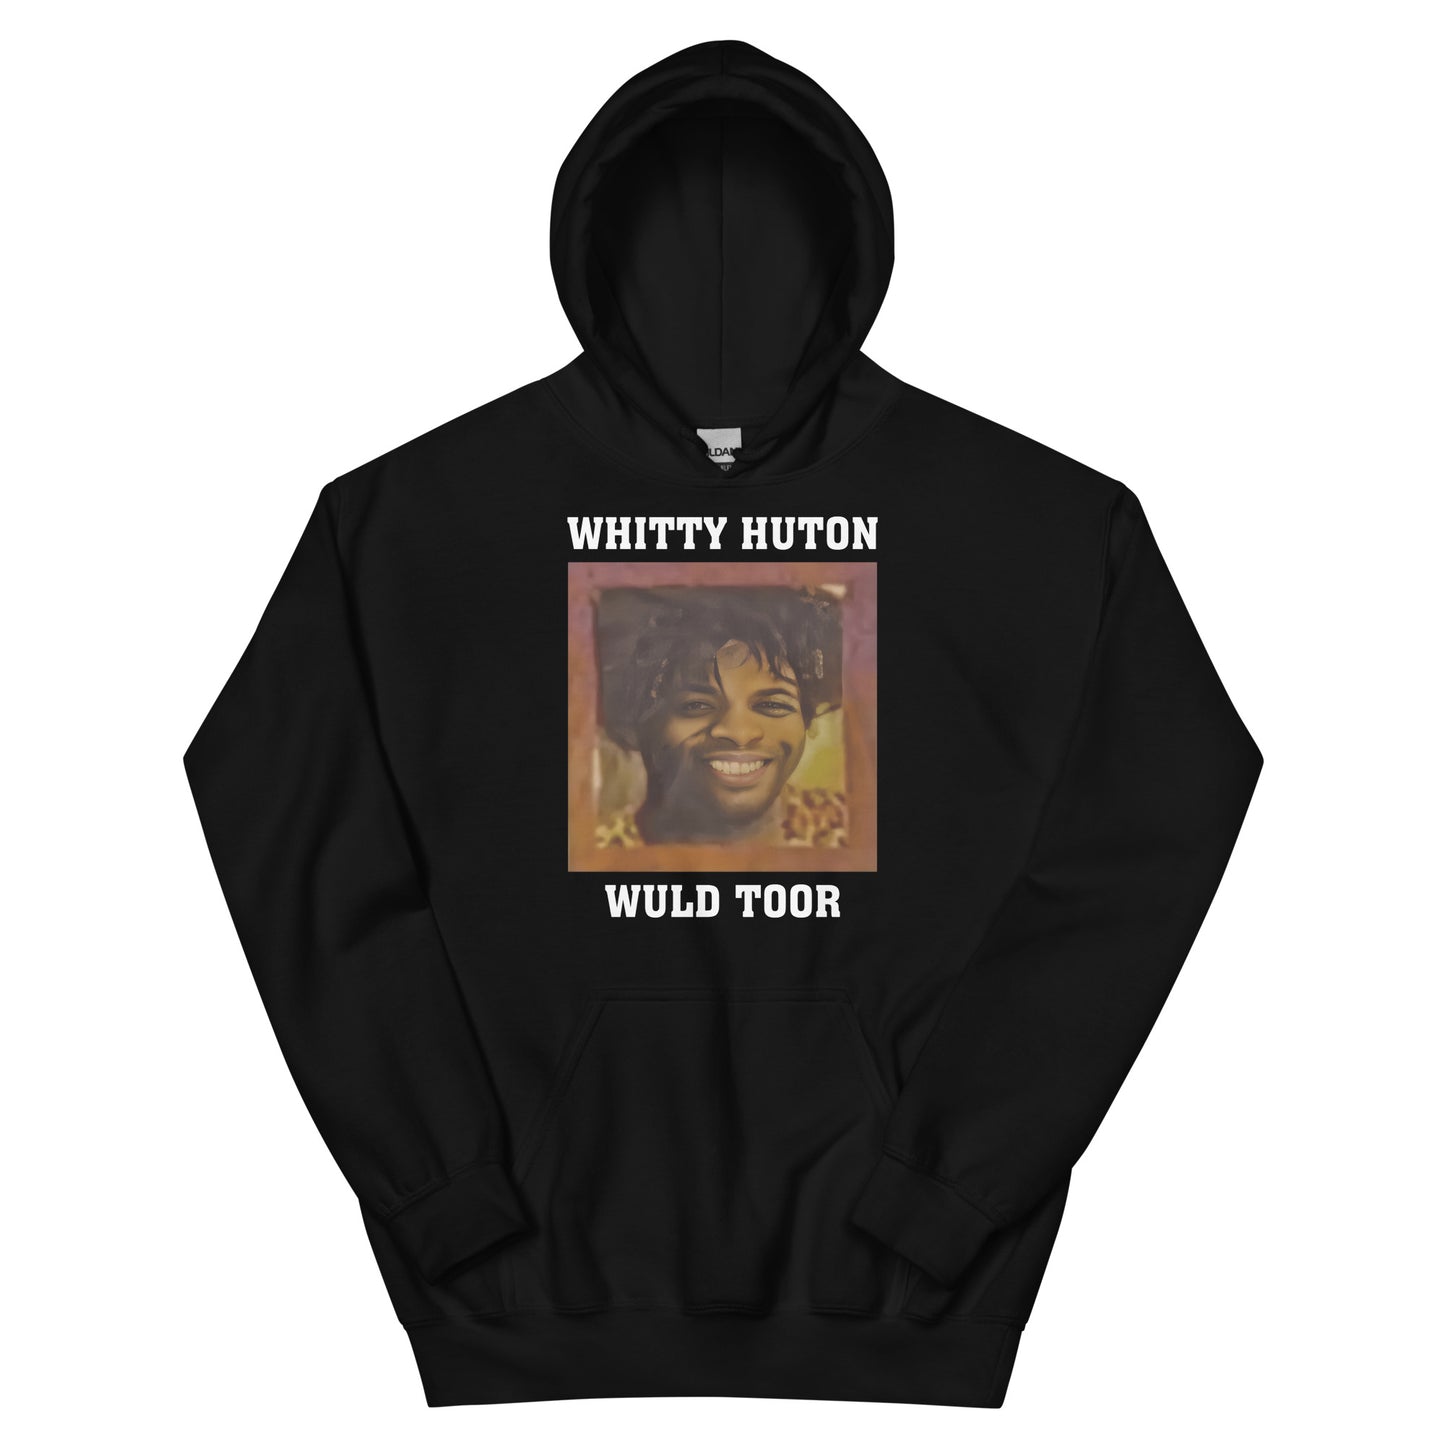 Primacy Whitty Hutton Hoodie